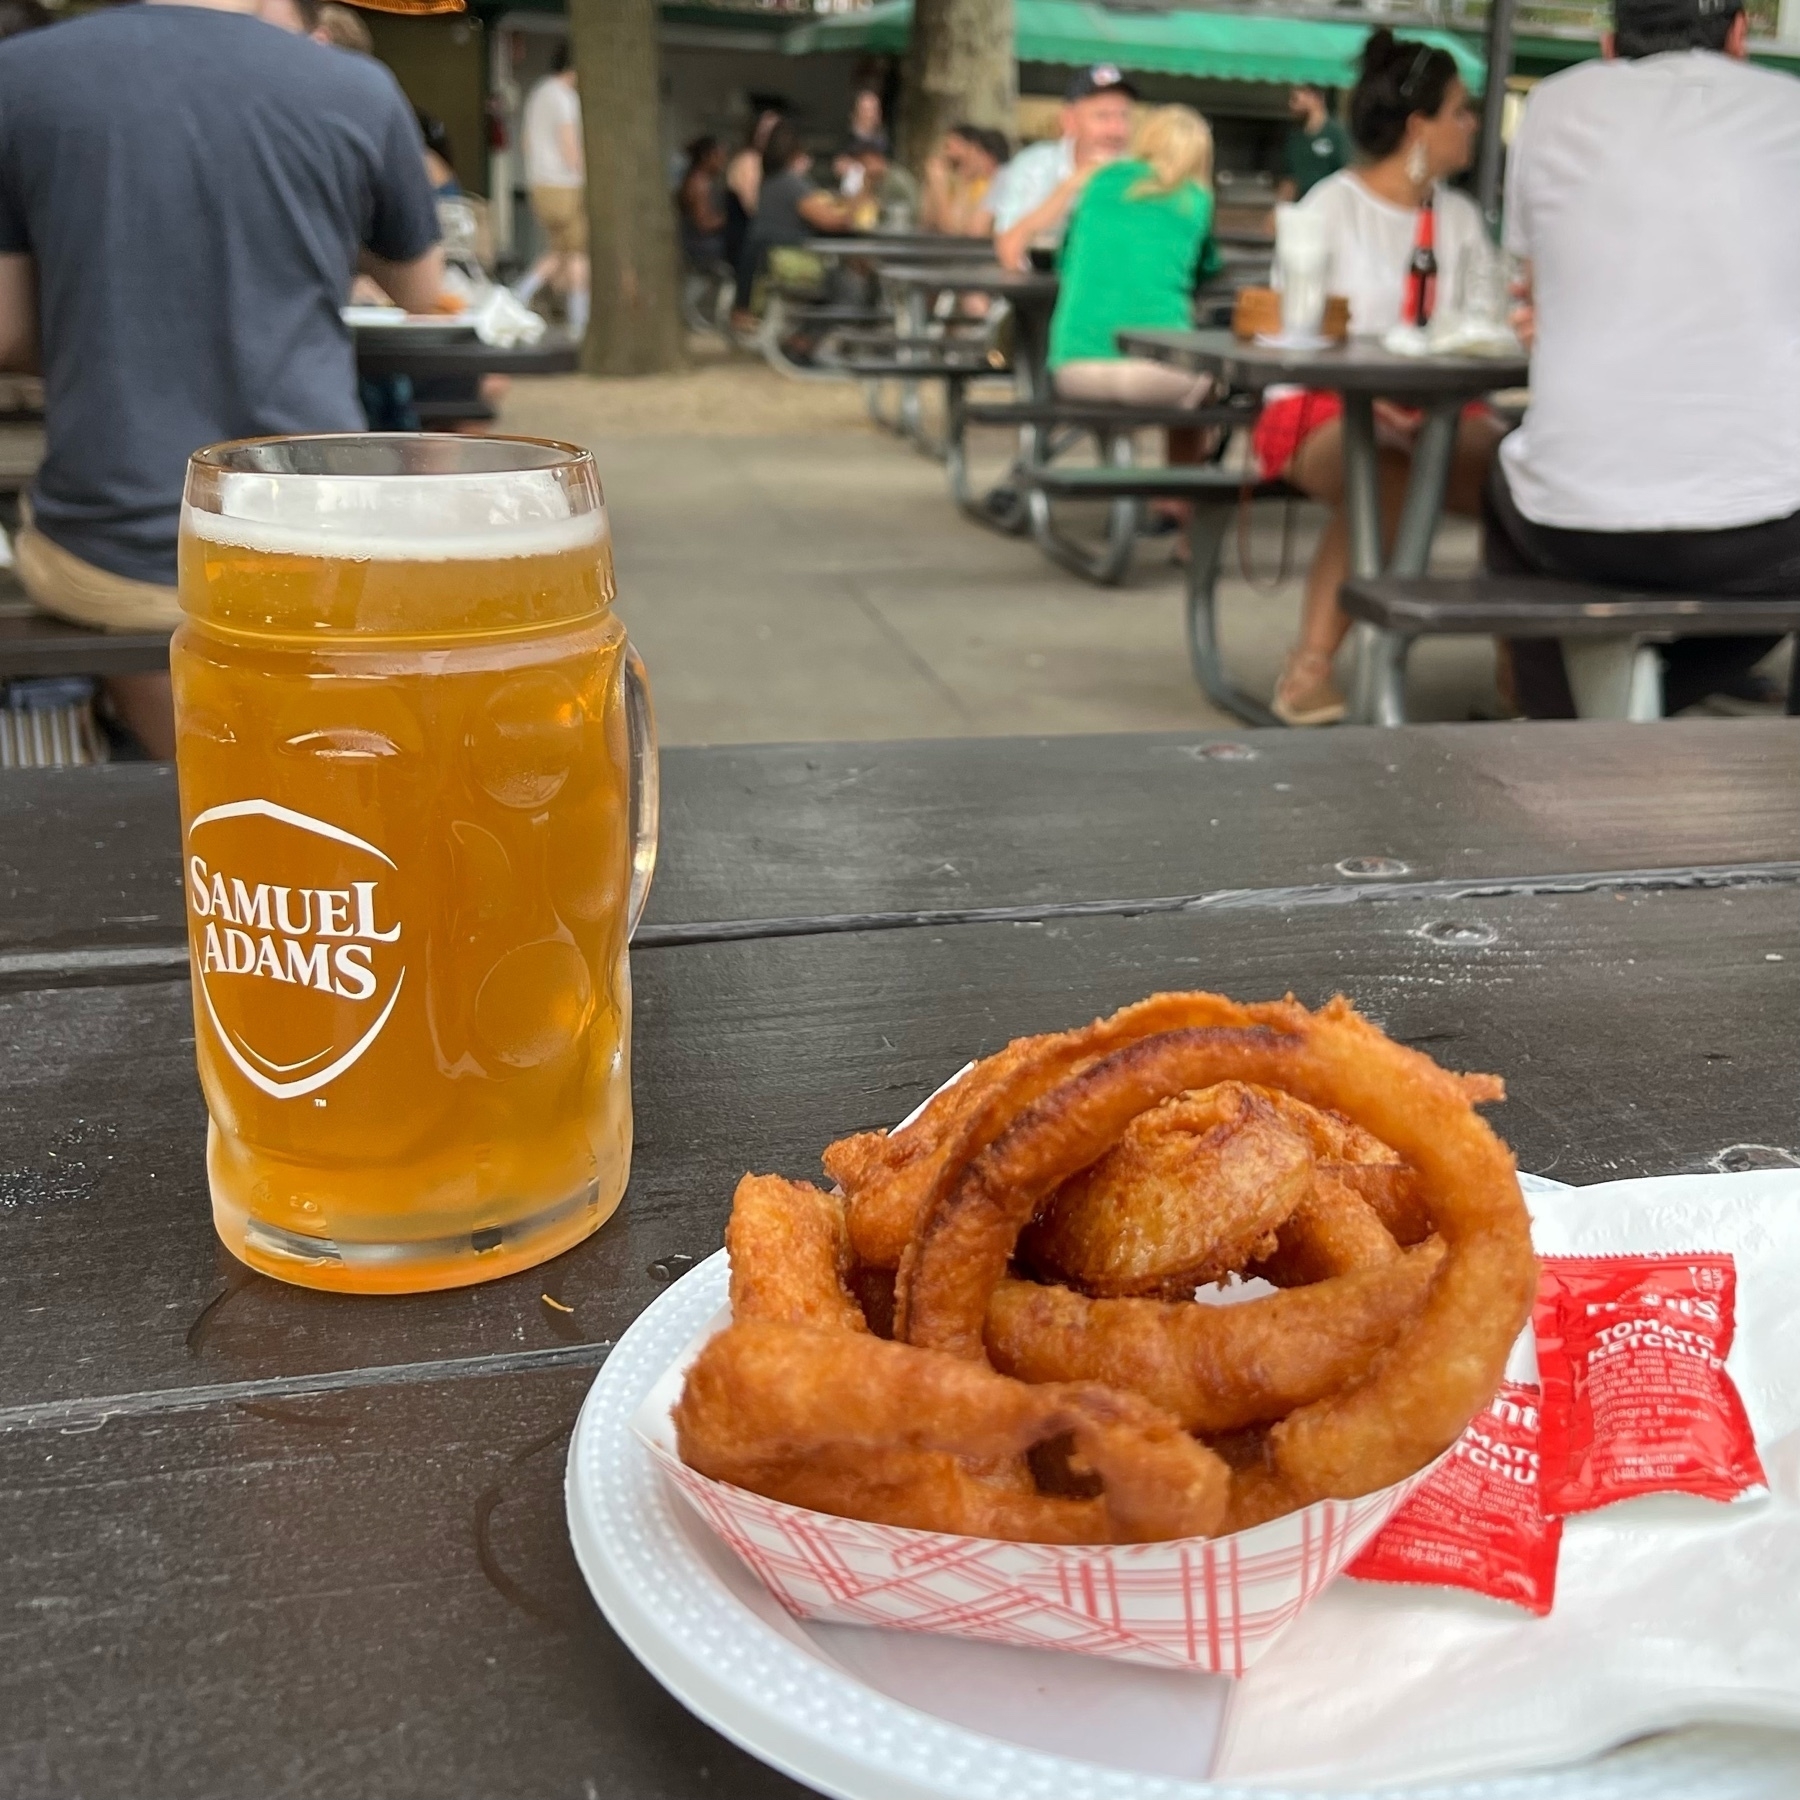 onion rings on a plate next to a full mug of beer, biergarten scene in background